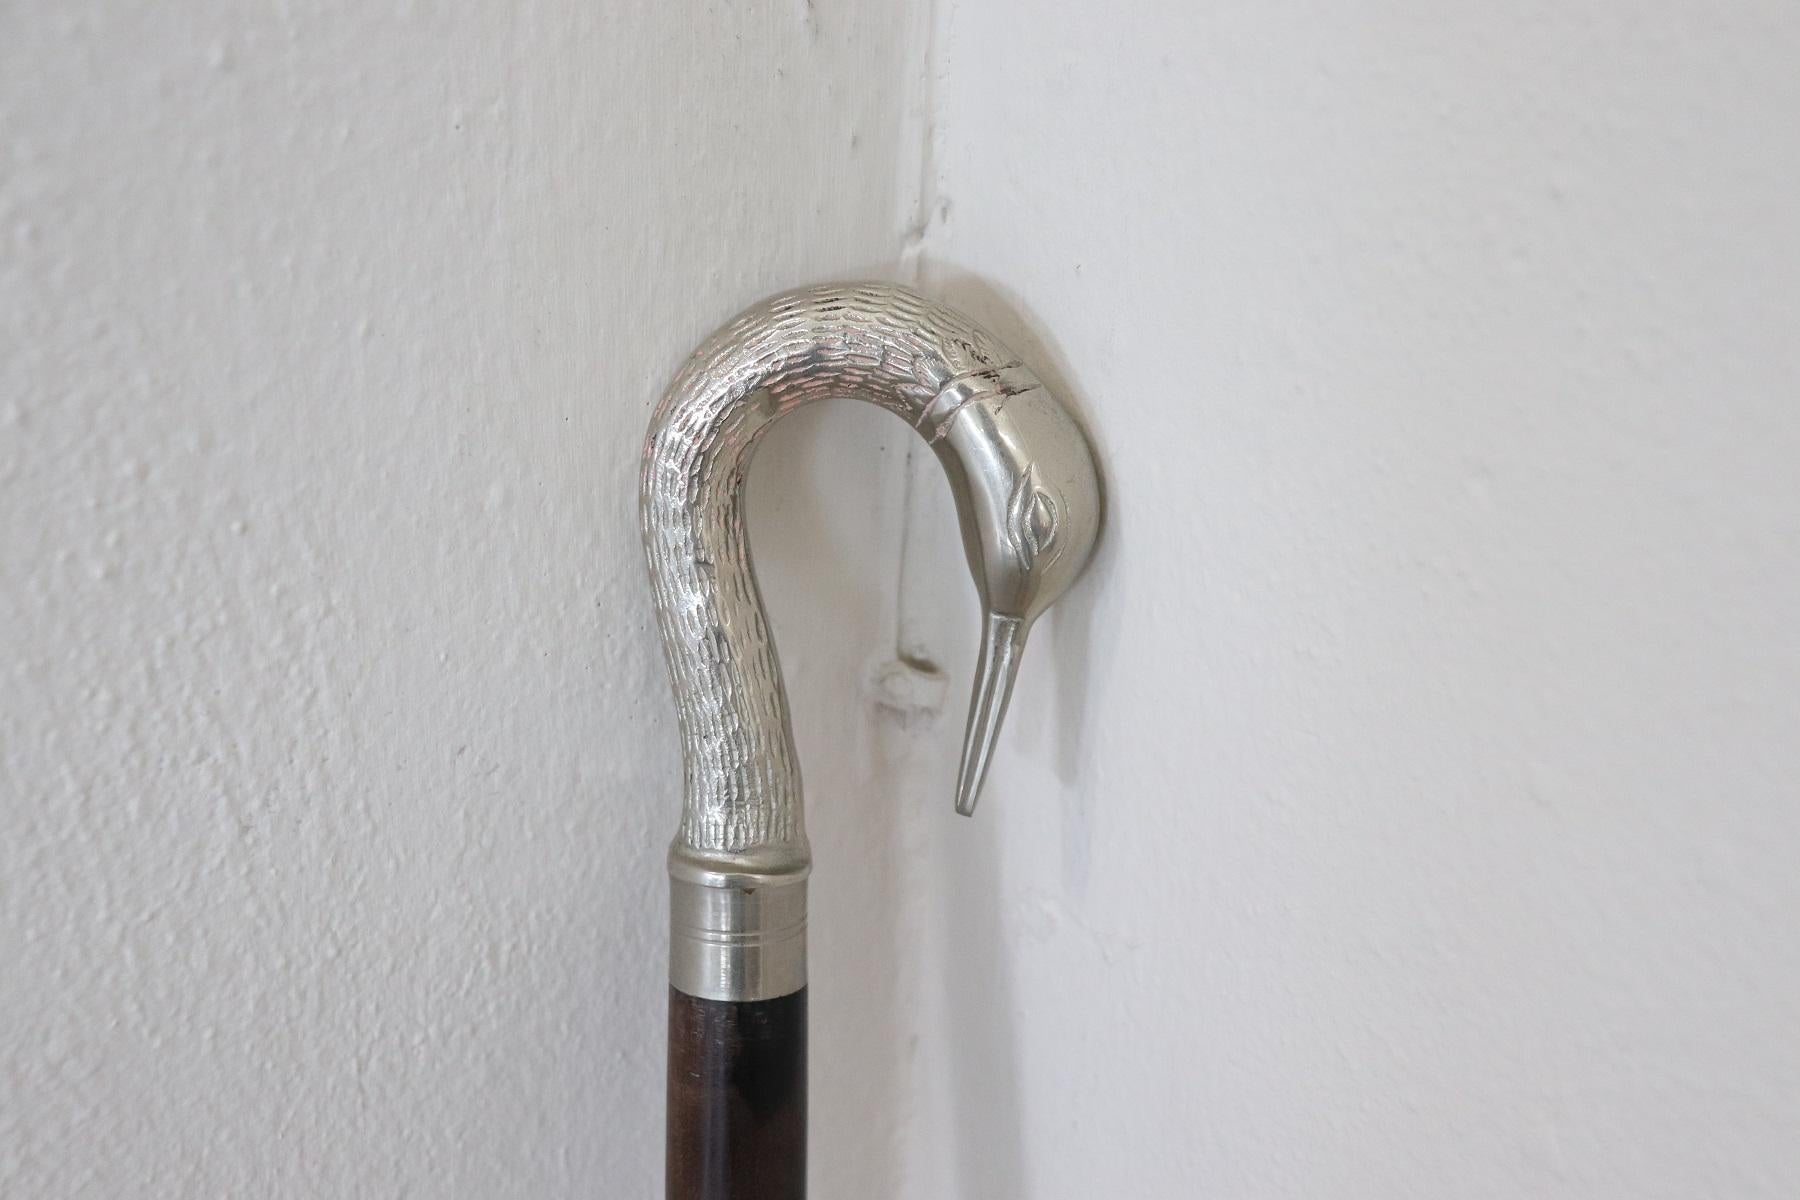 Beautiful walking stick made of precious walnut wood with a finely chiseled silver plated metal handle. The handle has a particular swan-head shape. Very elegant for your day and evening walks.